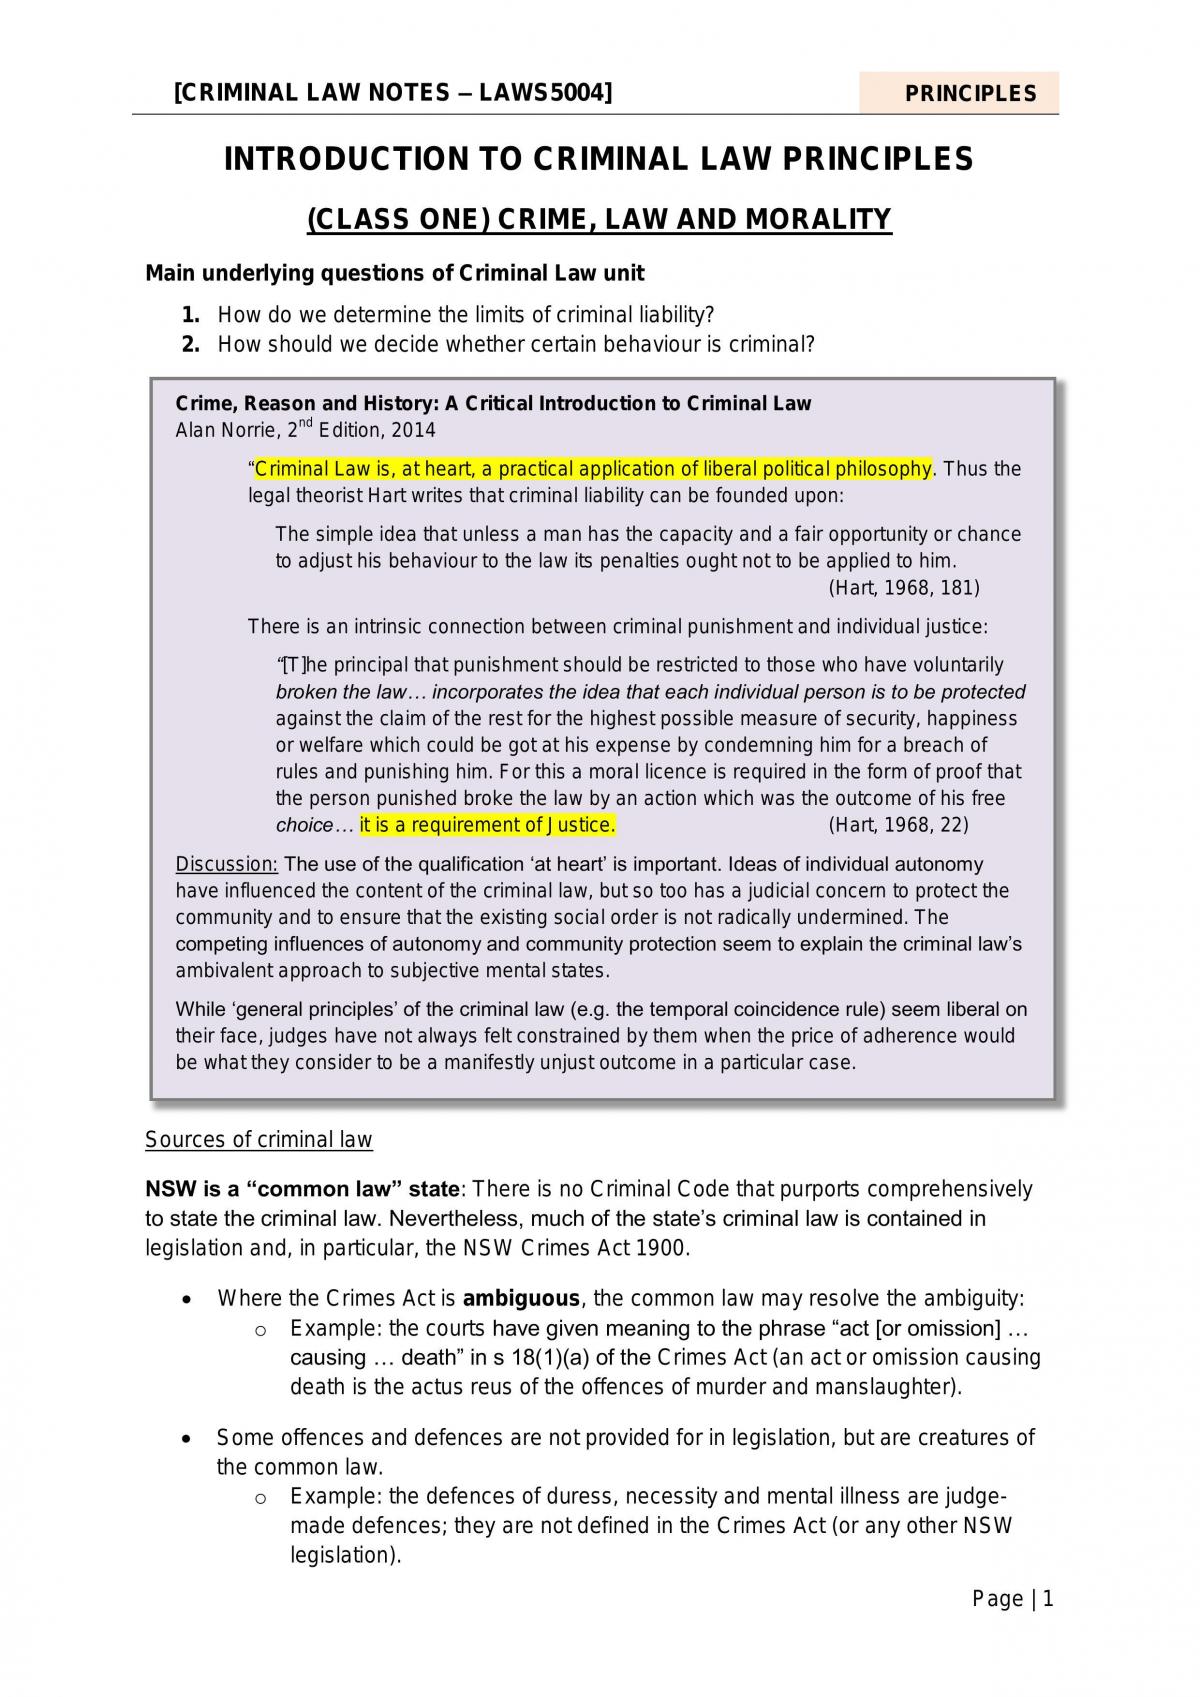 LAWS1016 Criminal Law Notes and Analysis for Final Exam - Page 19